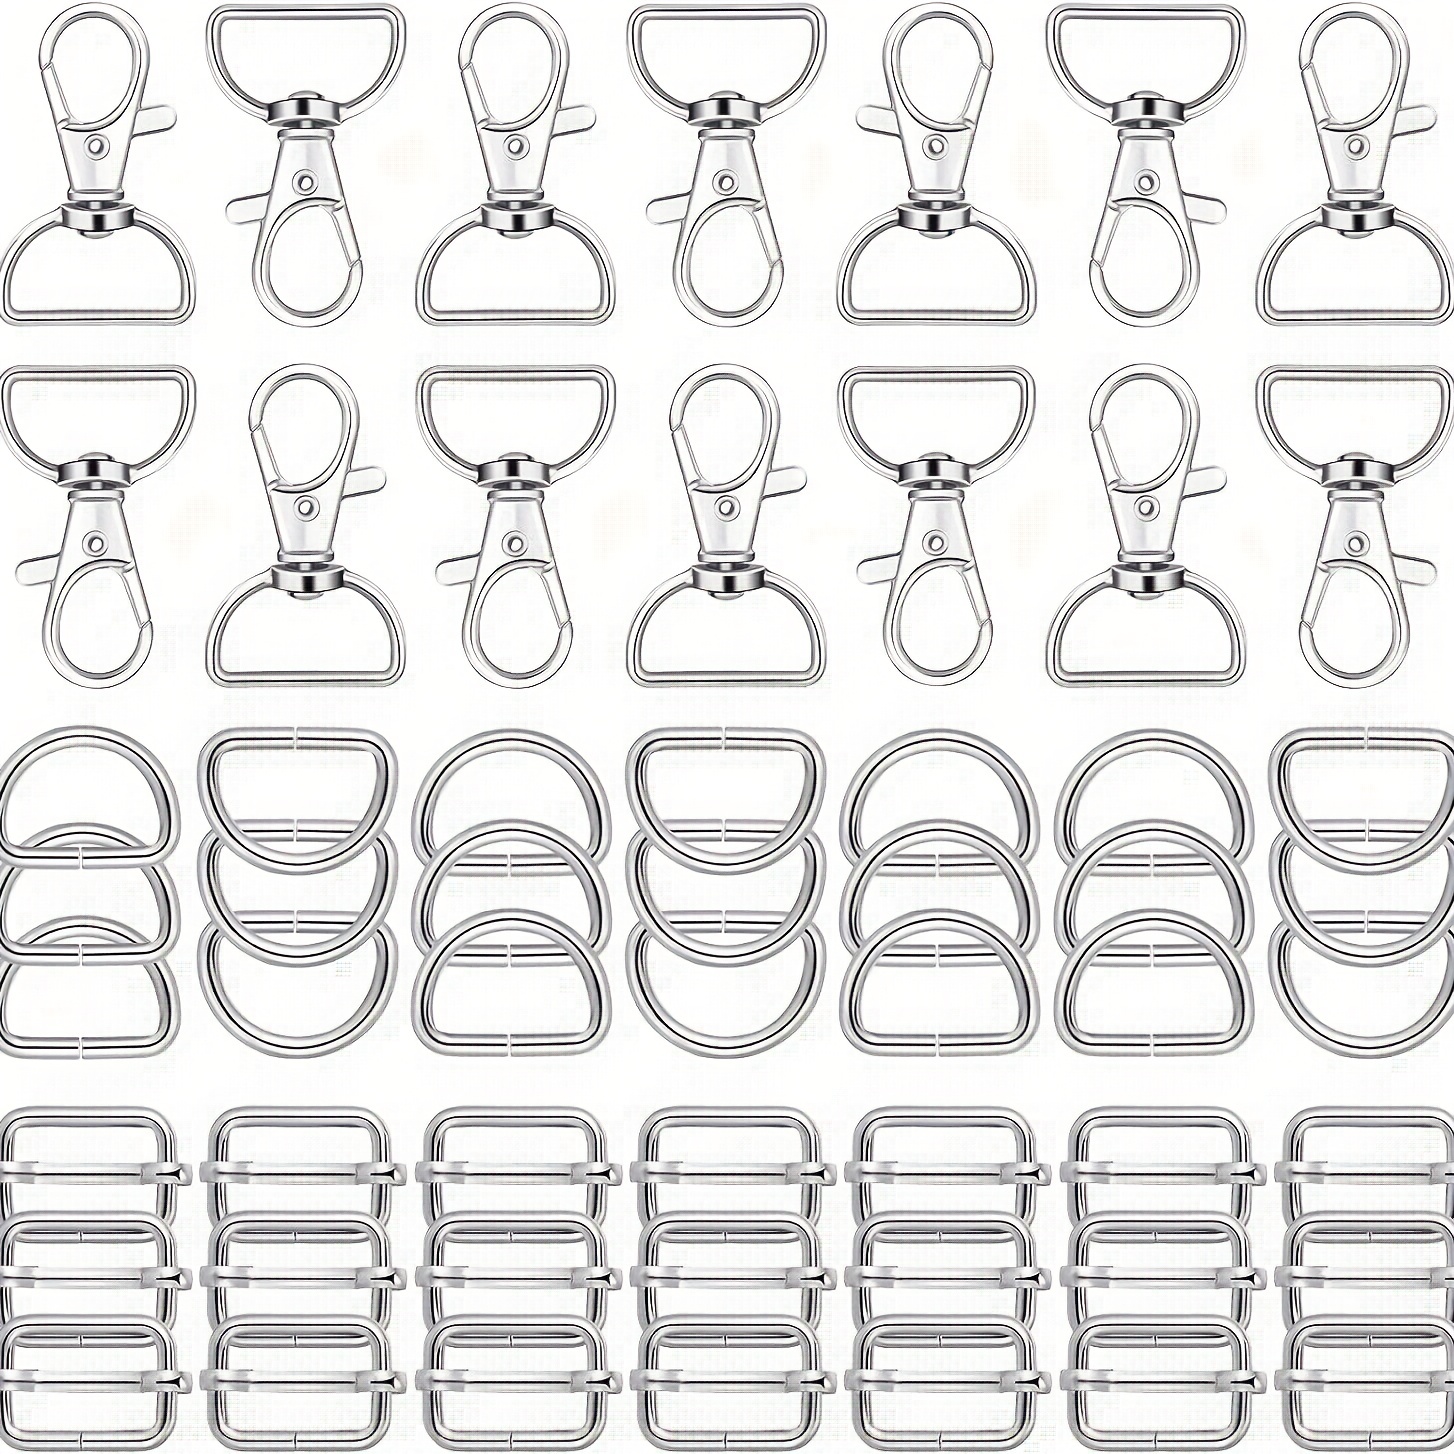 

56pcs Zinc Alloy Rotating Lobster Chain D-type Steel Color Key Ring Sliding Buckle For Diy Key Chain Luggage Hardware Accessories